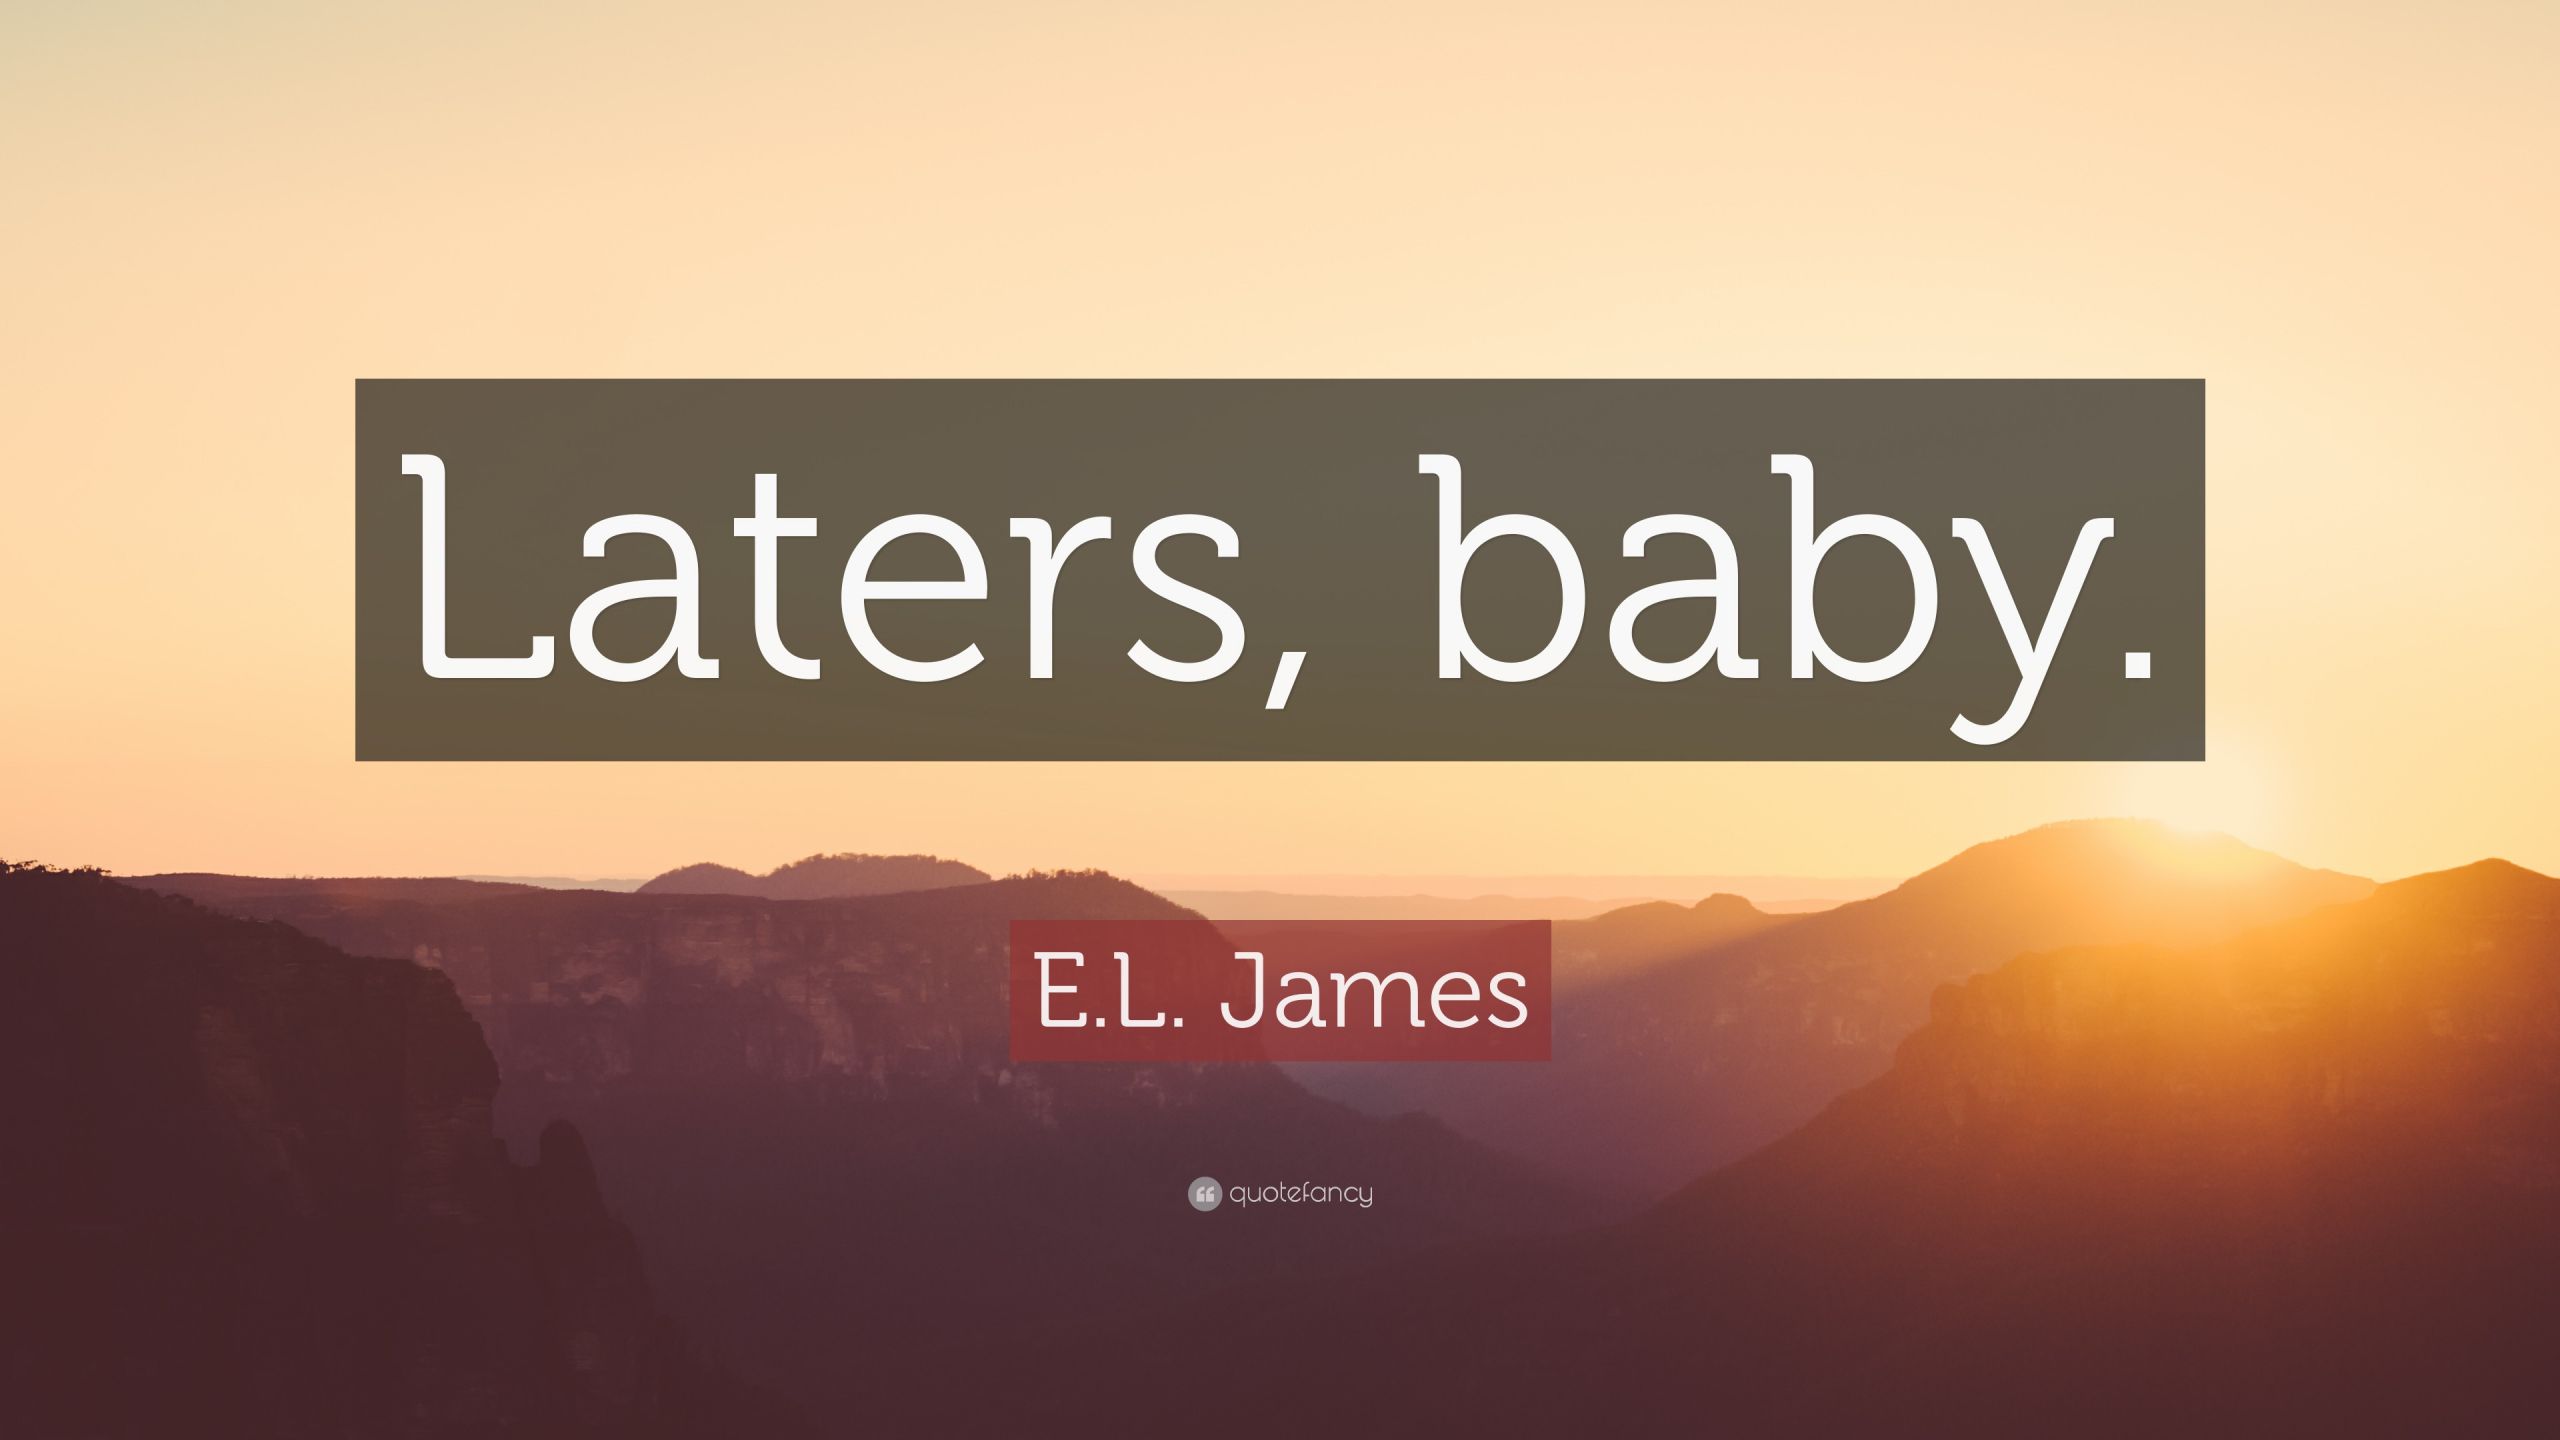 Laters Baby Quote
 E L James Quote “Laters baby ” 12 wallpapers Quotefancy